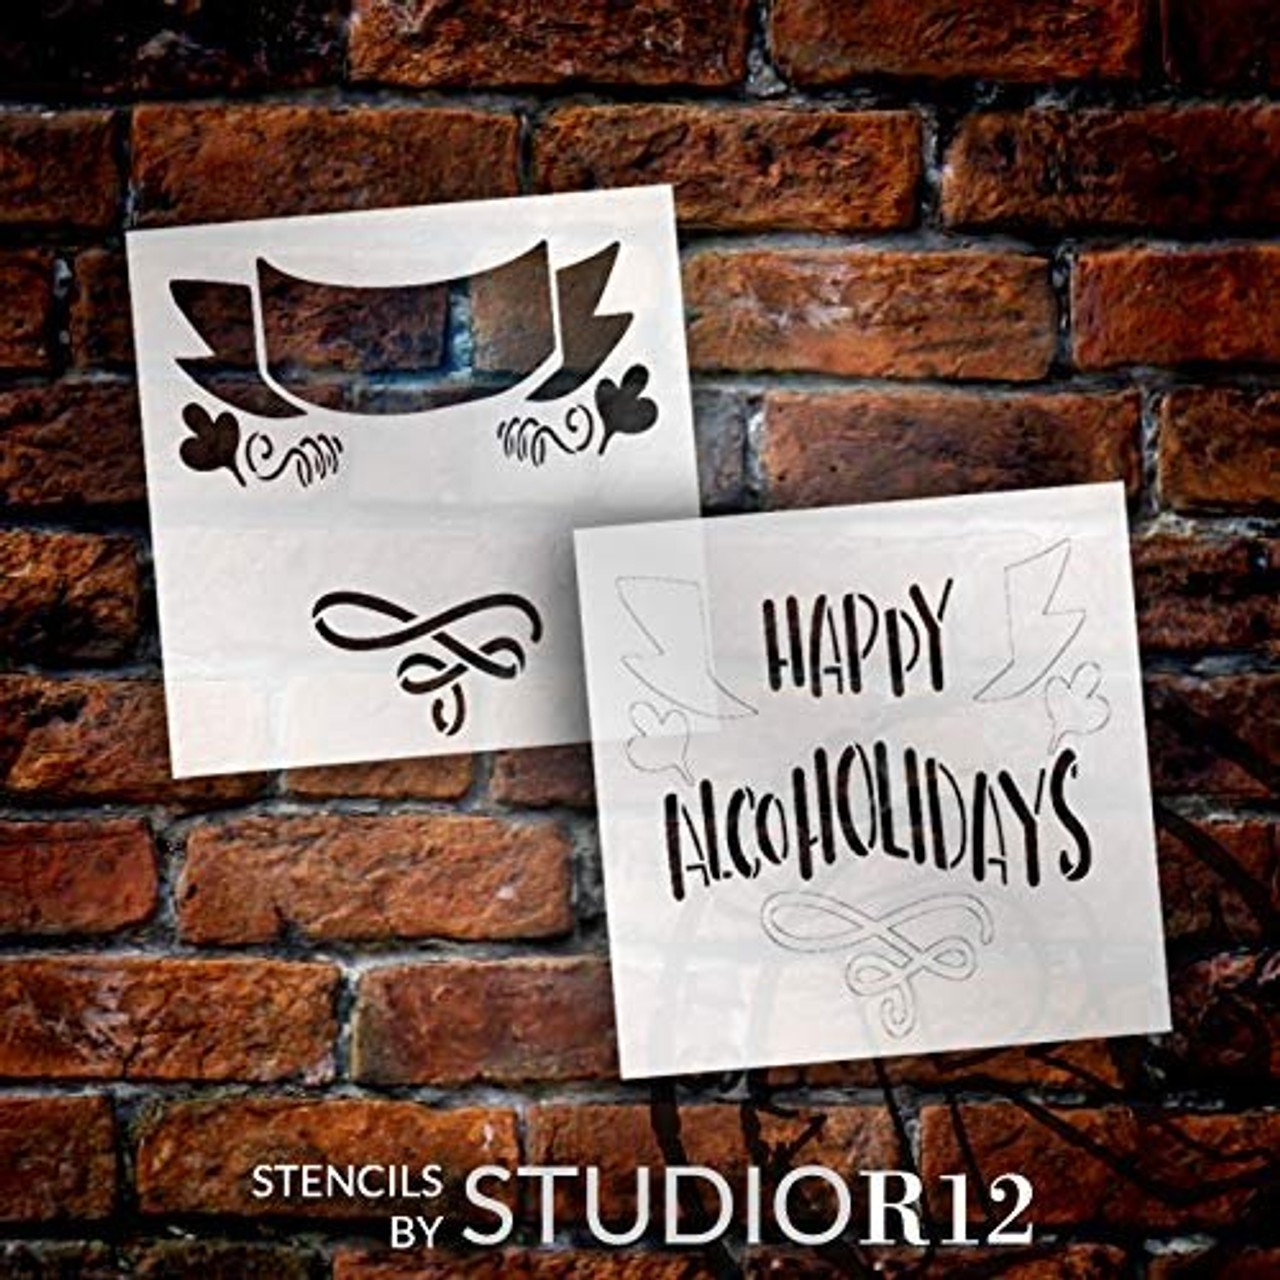 Happy Alcoholidays 2-Part Stencil with Banner by StudioR12 | DIY Fun Christmas Quote Home Decor | Embellished Holiday Word Art | Craft & Paint Wood Signs | Reusable Mylar Template | Size (9 x 9 inch)